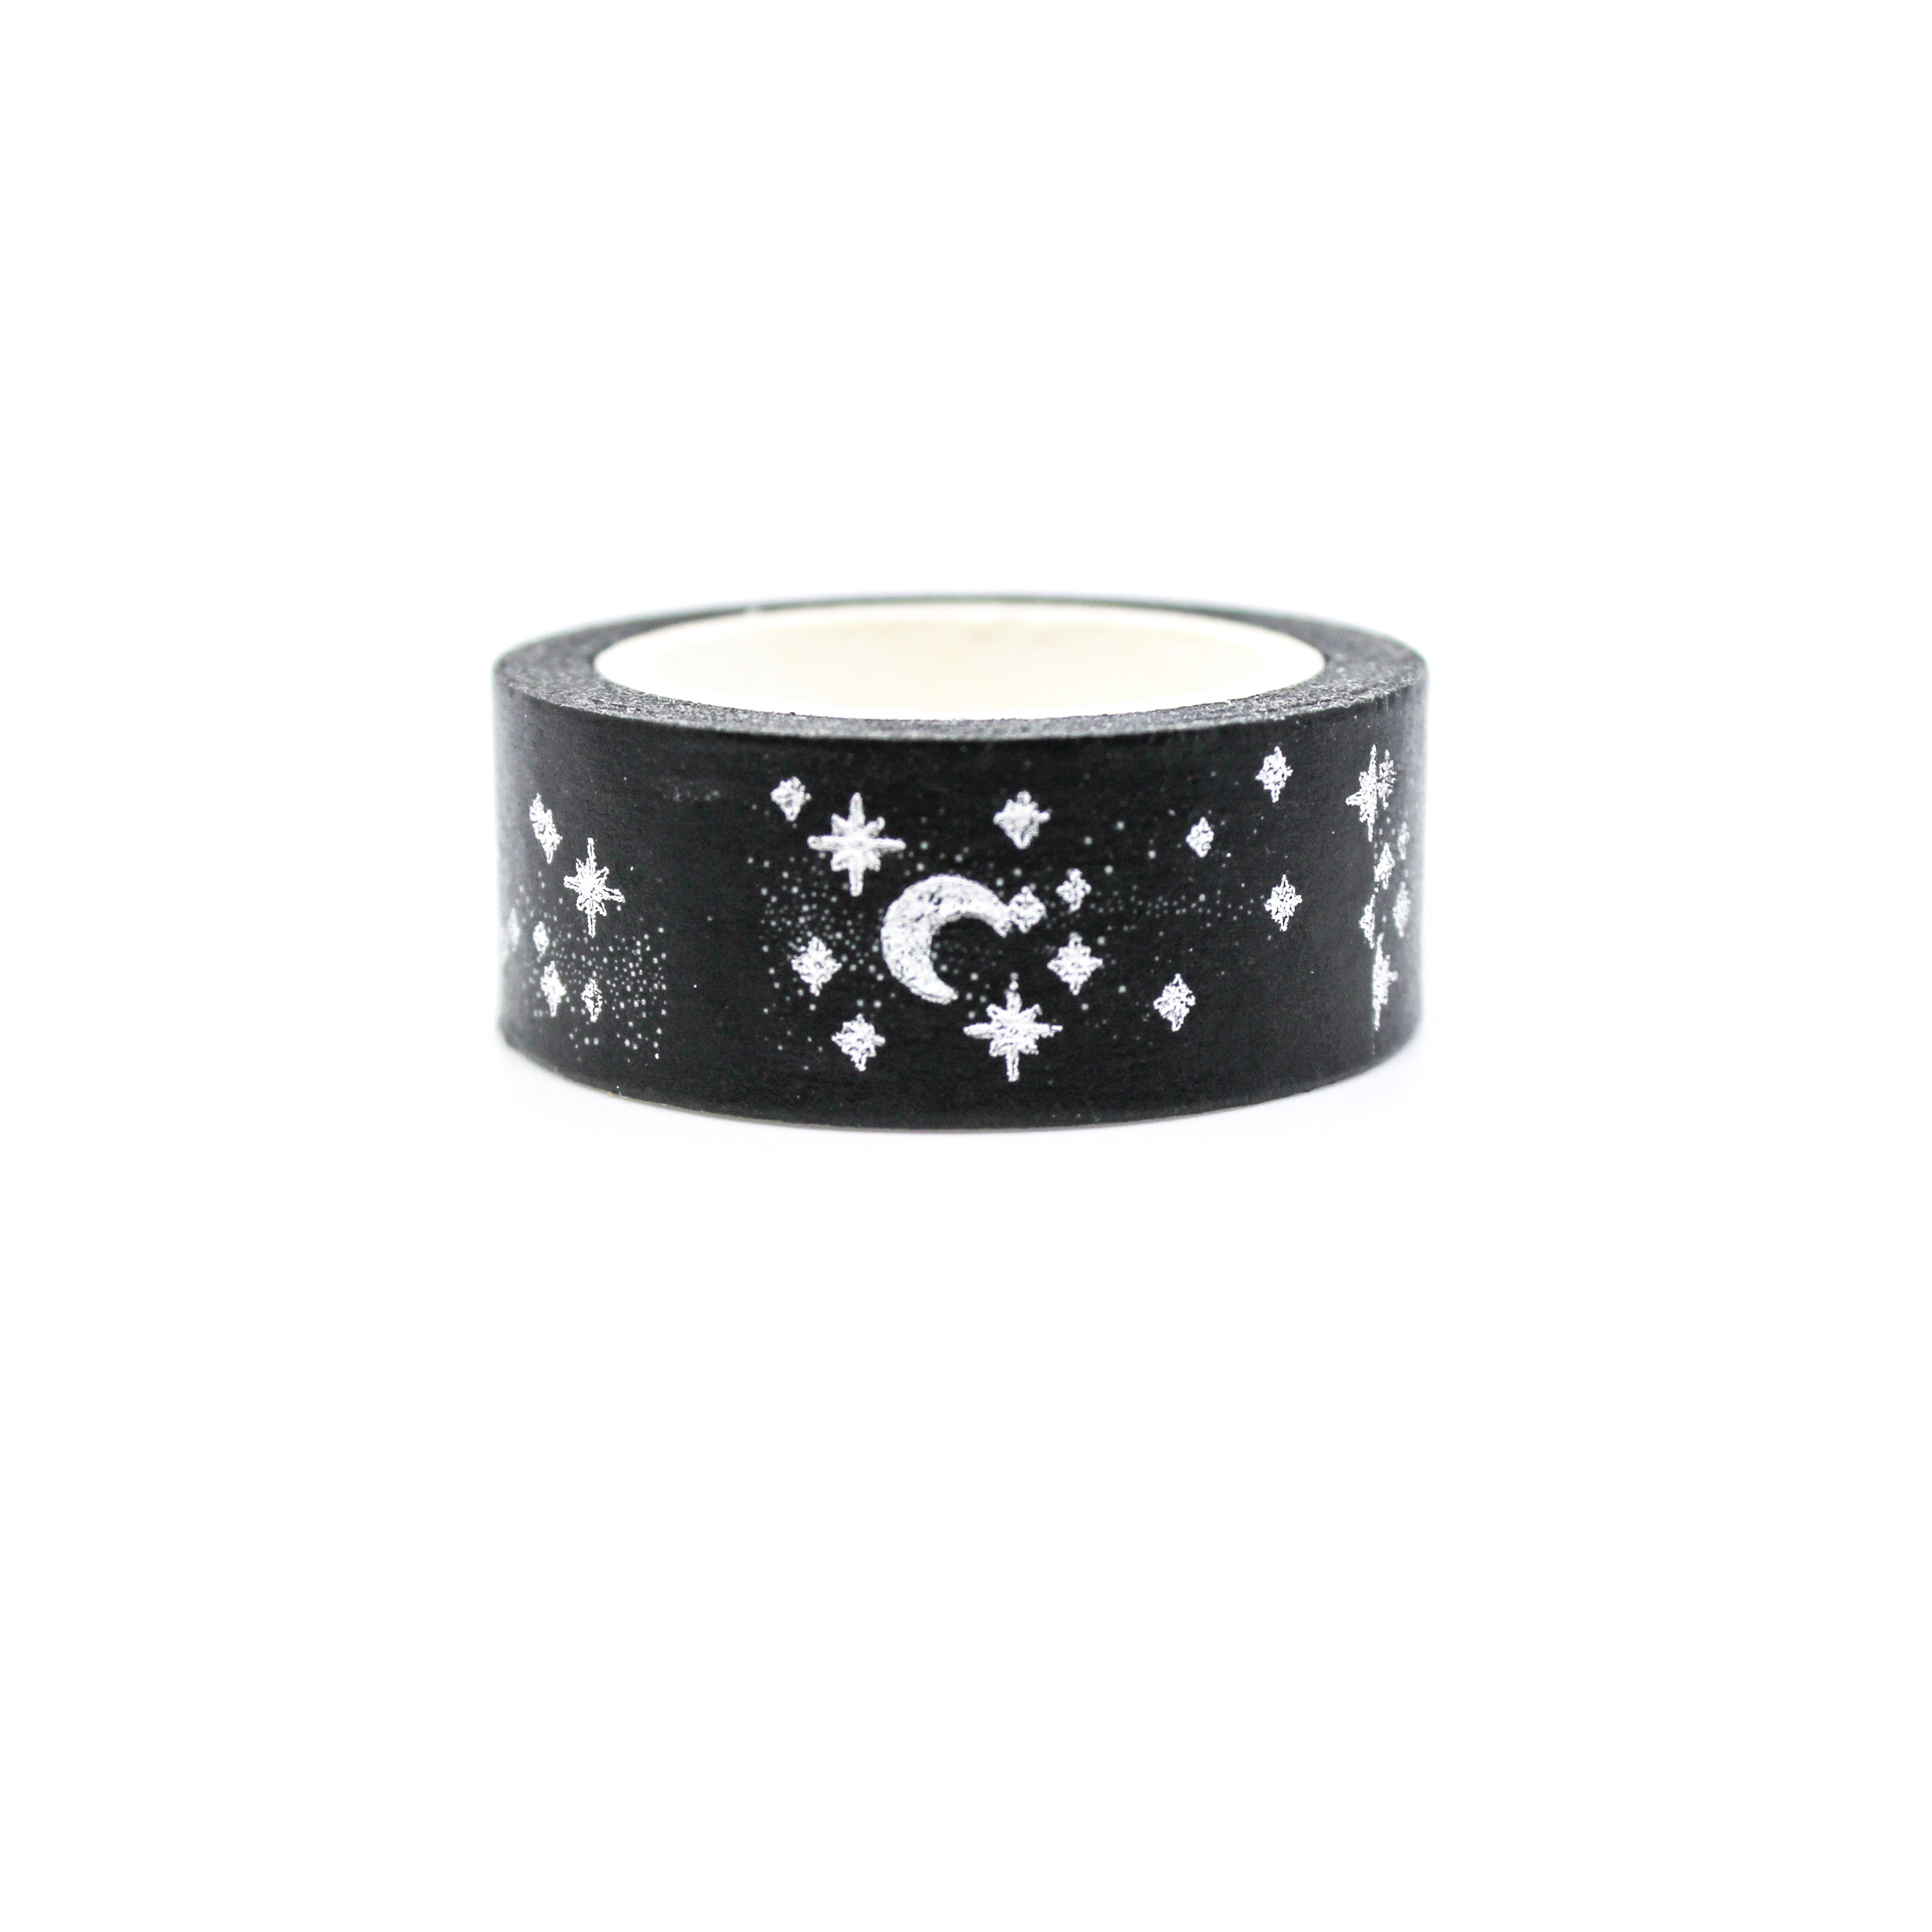 This is a nice view of celestial stars and moons in black washi tapes from BBB Supplies Craft Shop